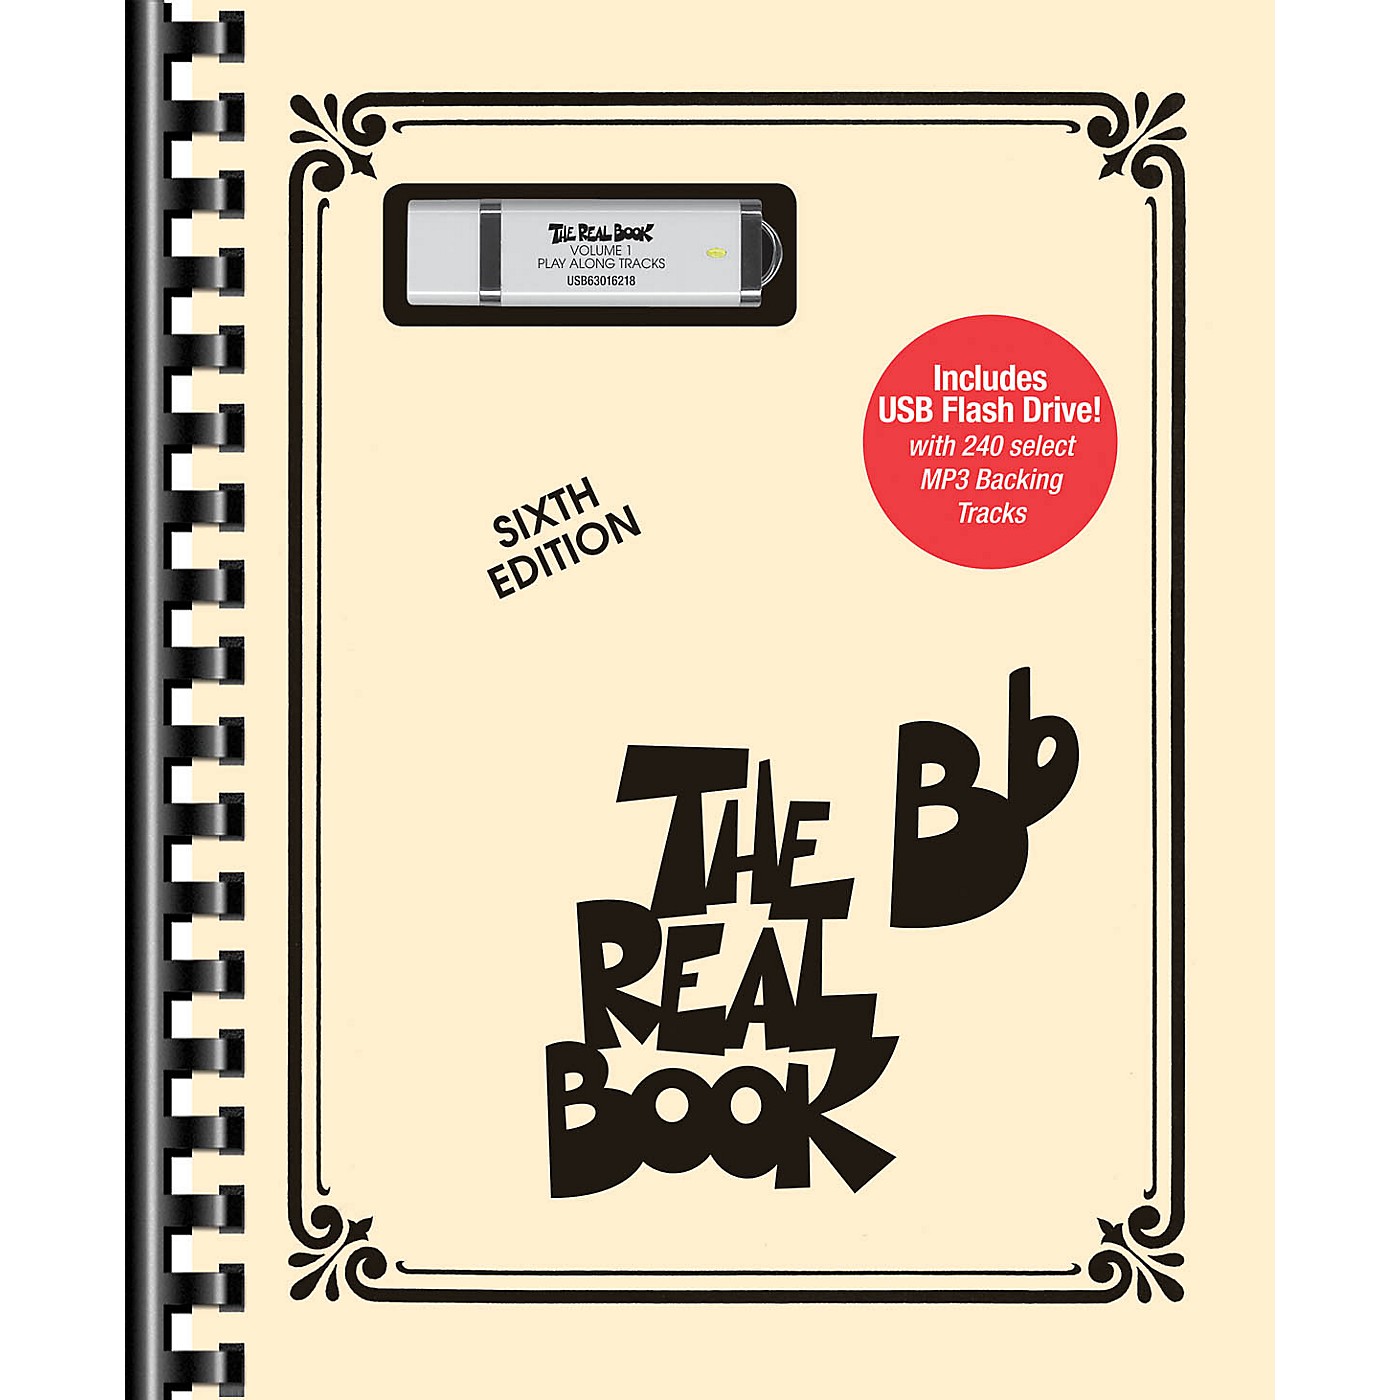 Hal Leonard The Real Book - Volume 1 Real Book Play-Along Series Softcover with USB thumbnail